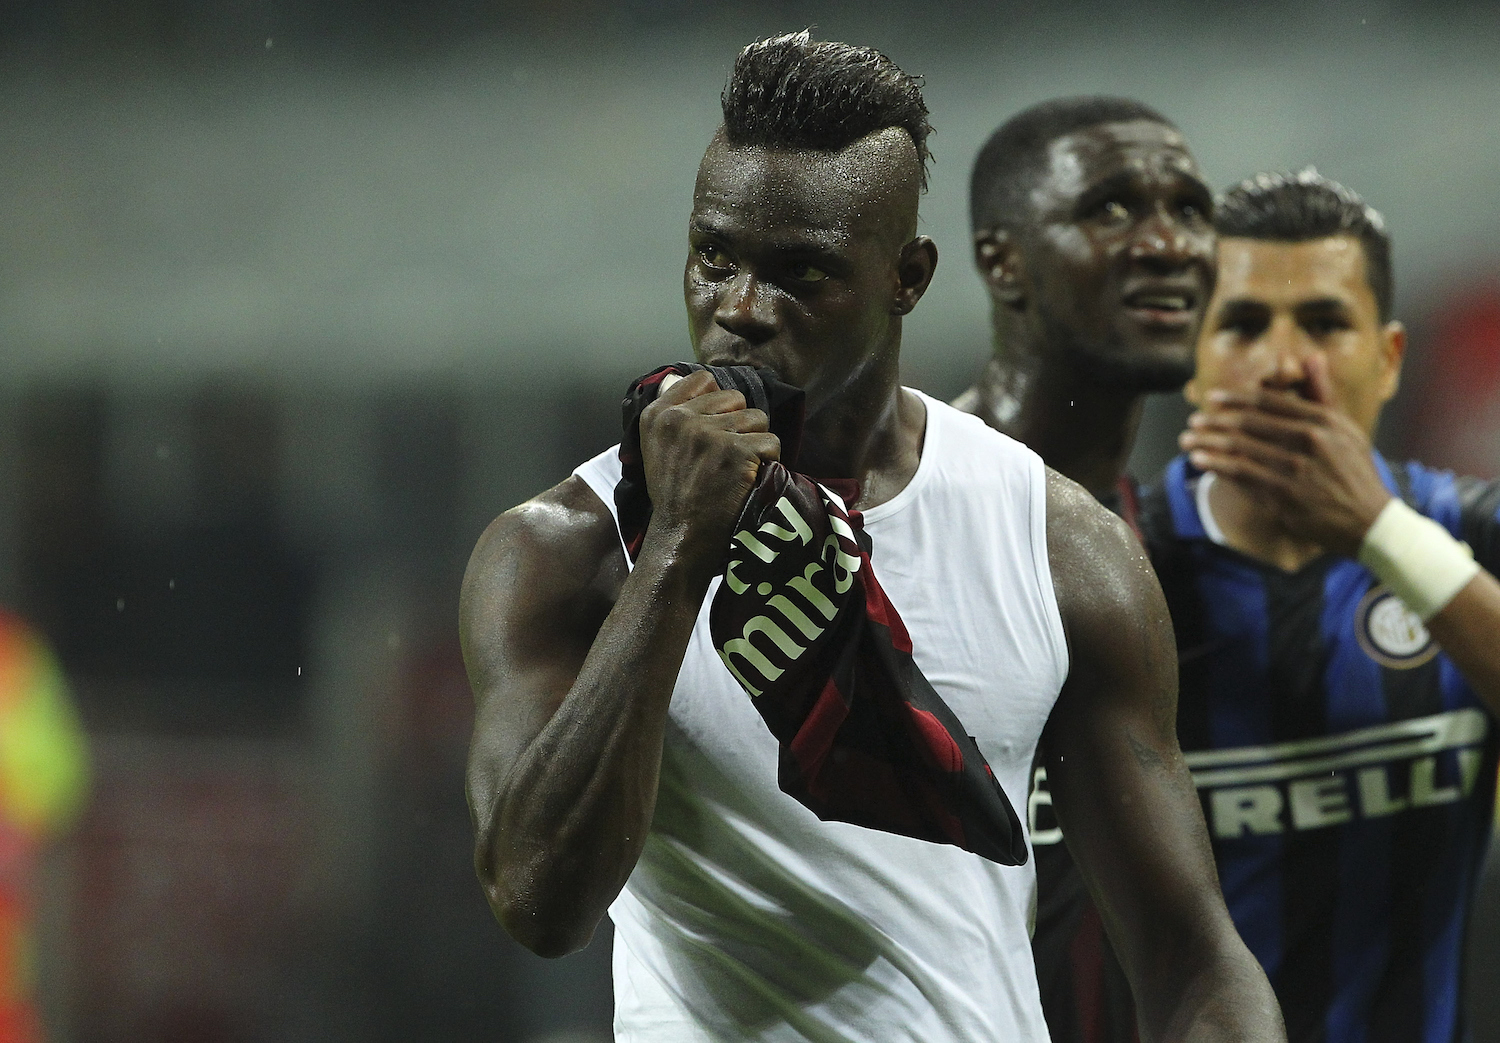 Balo kisses the badge after the derby loss to Inter in September 2015. | Marco Luzzani/Getty Images